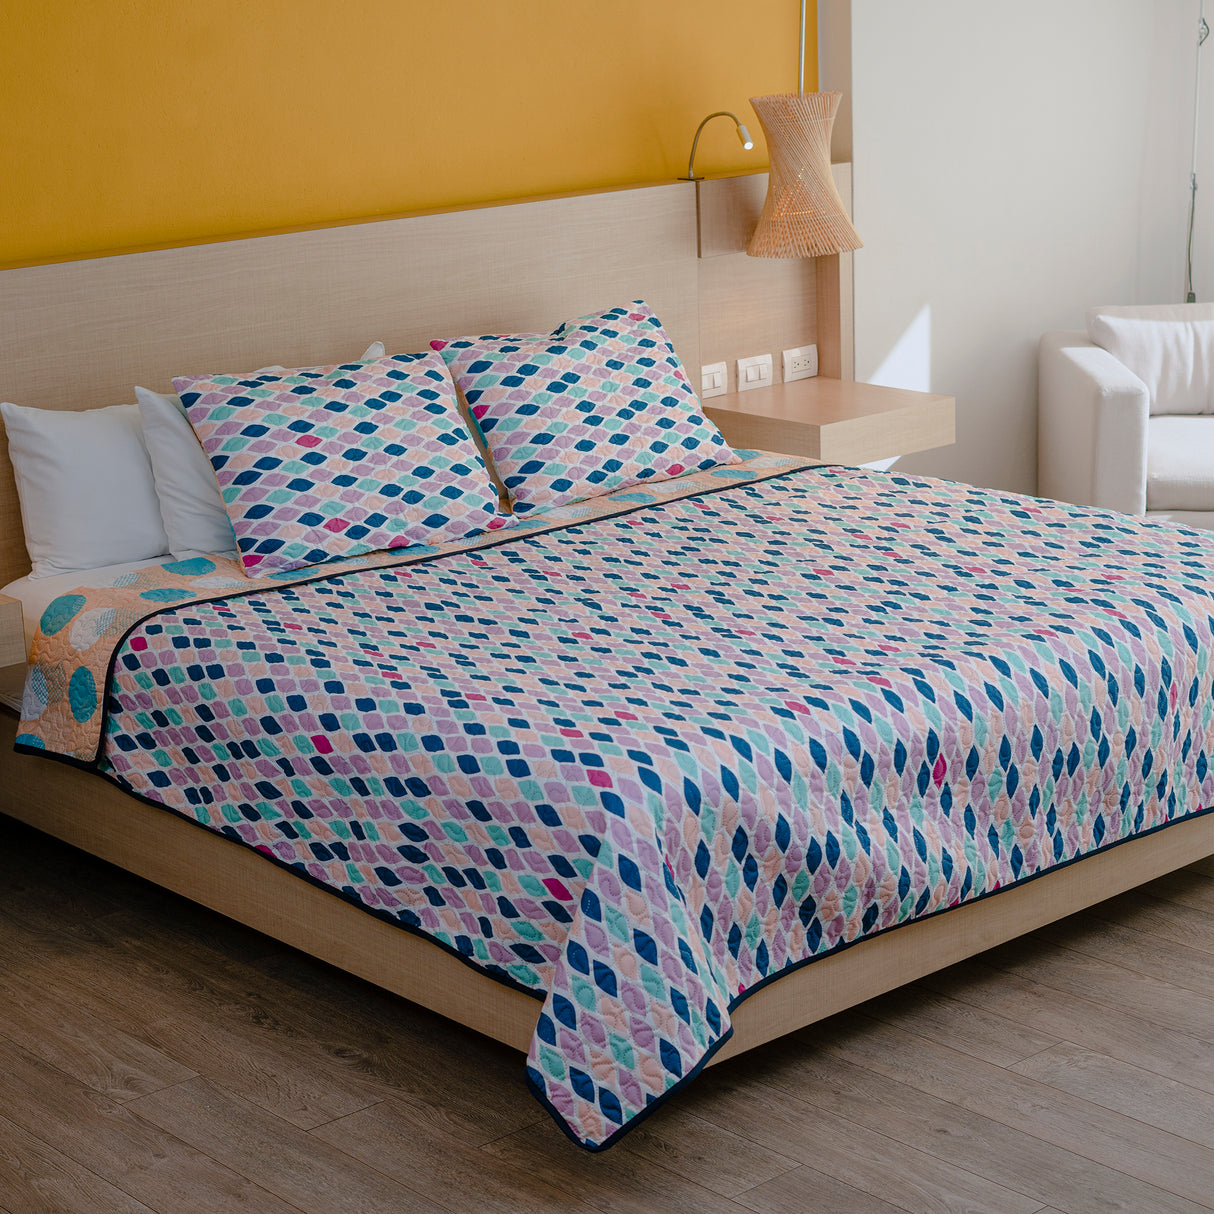 Double-Sided Diamond Printed Microfiber Bed Cover